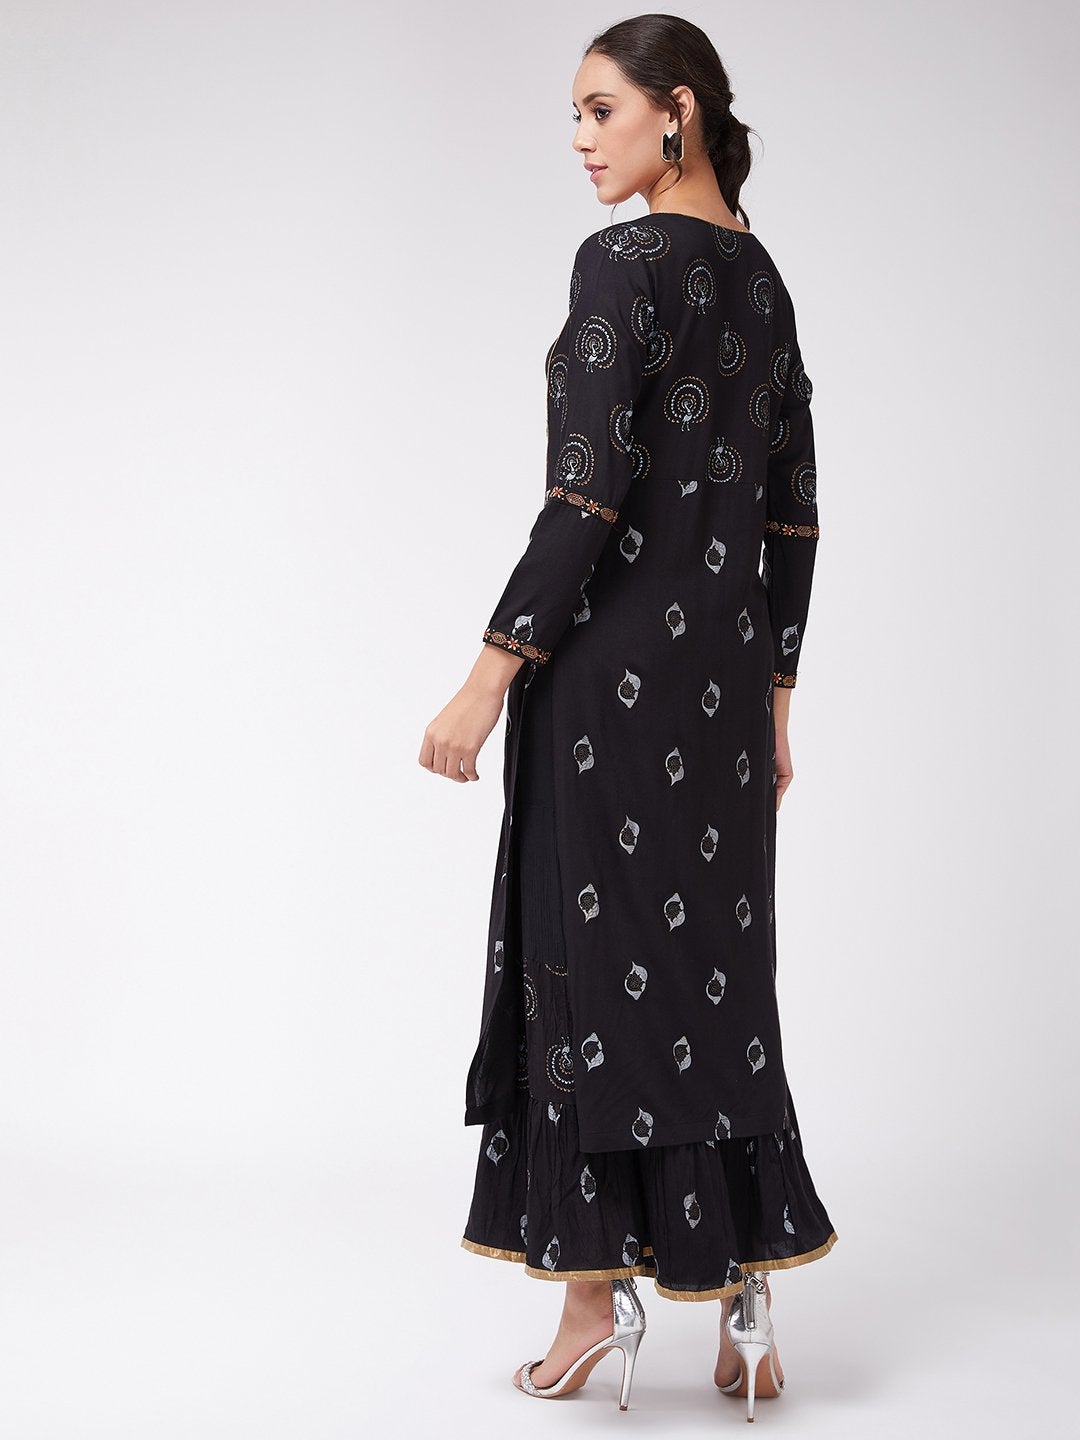 Women's Foil Printed And Embroidered Long Kurta - Pannkh